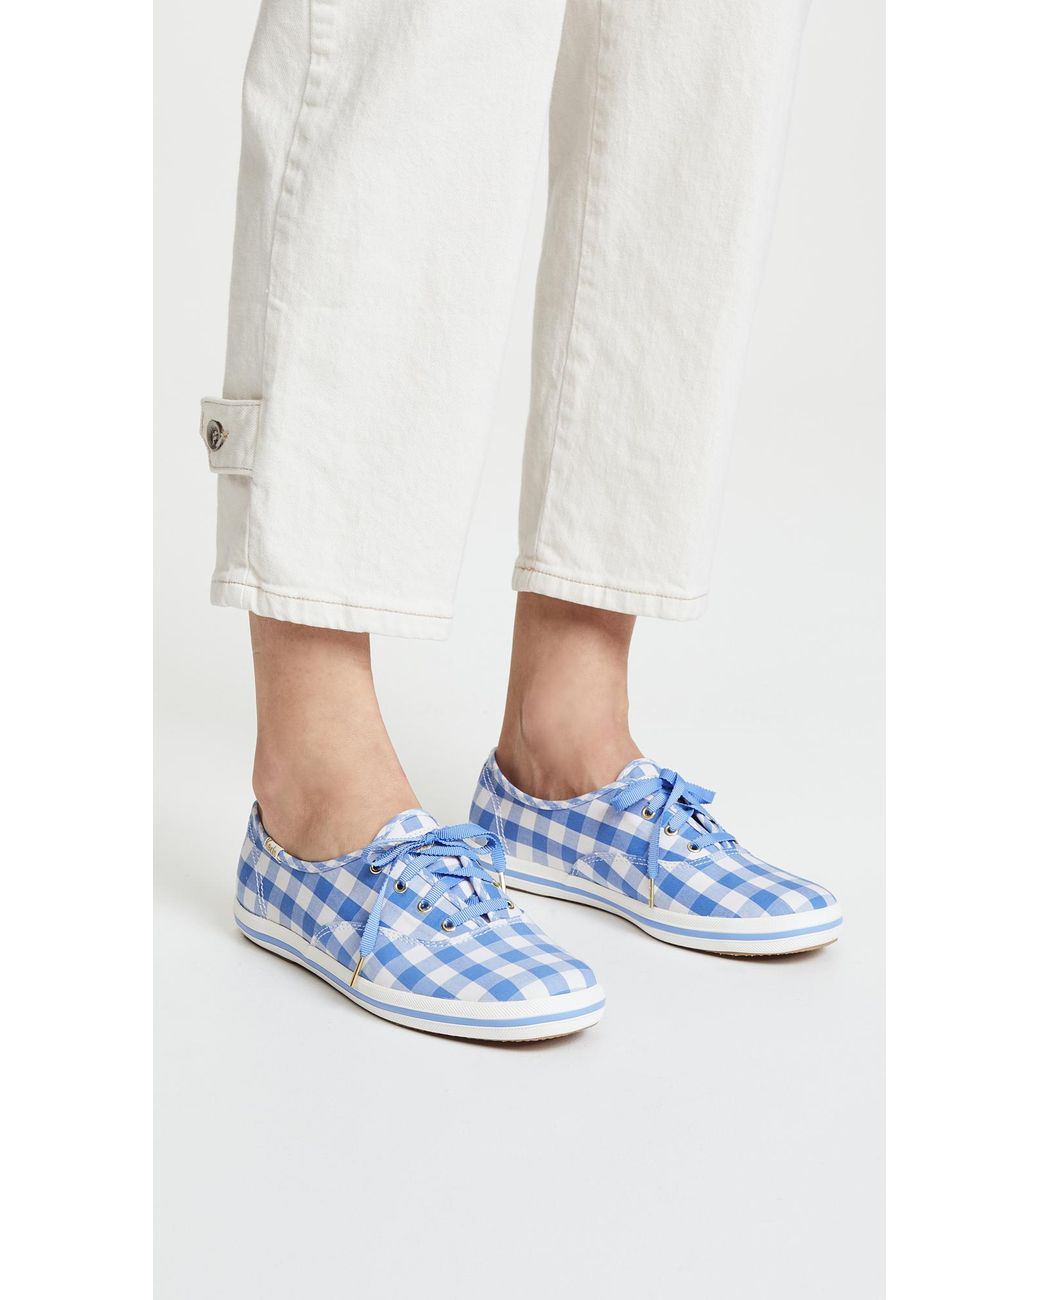 Keds X Kate Spade New York Gingham Sneakers in Blue | Lyst